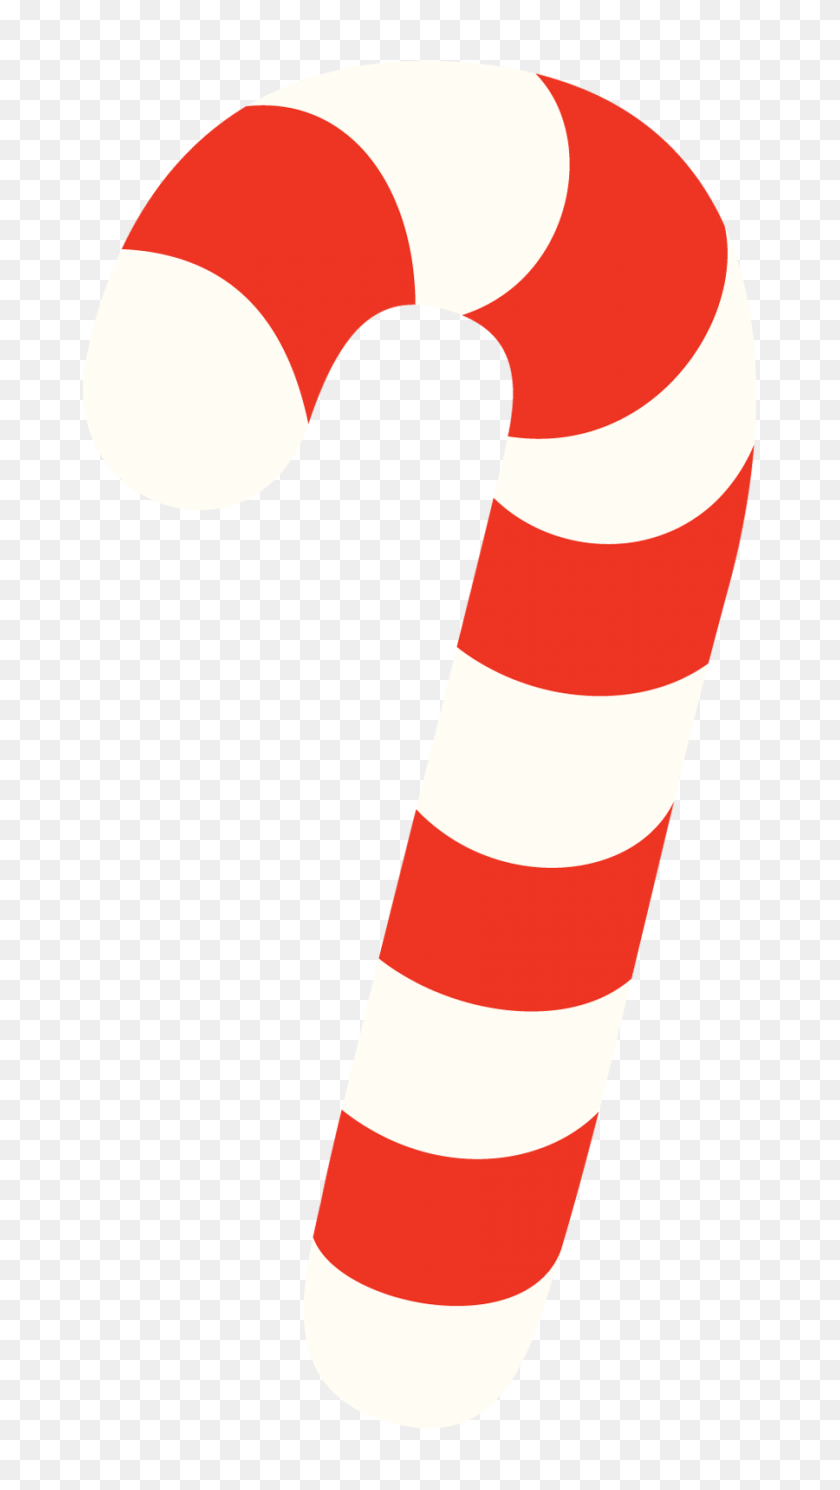 900x1650 Candy Cane Clipart And Graphics Collection - Greenery Clipart Free